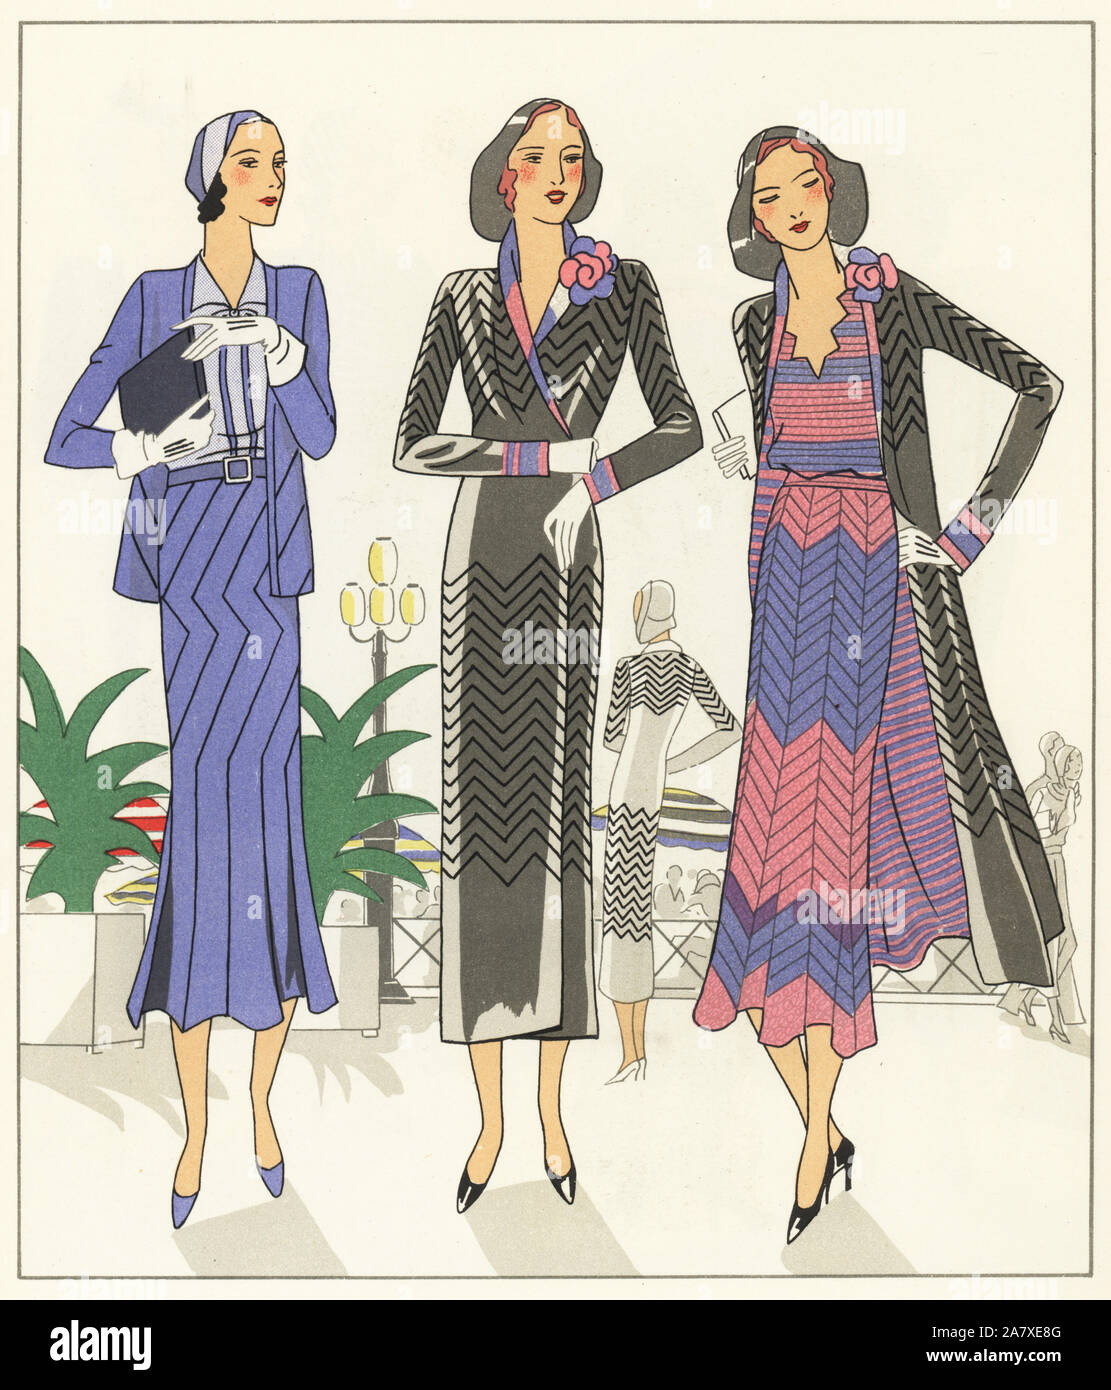 Woman in crepe blouse and blue stockinette ensemble, and woman in wrap of Moroccan crepe over printed crepe de chine dress. Handcolored pochoir (stencil) lithograph from the French luxury fashion magazine Art, Gout, Beaute, 1931. Stock Photo